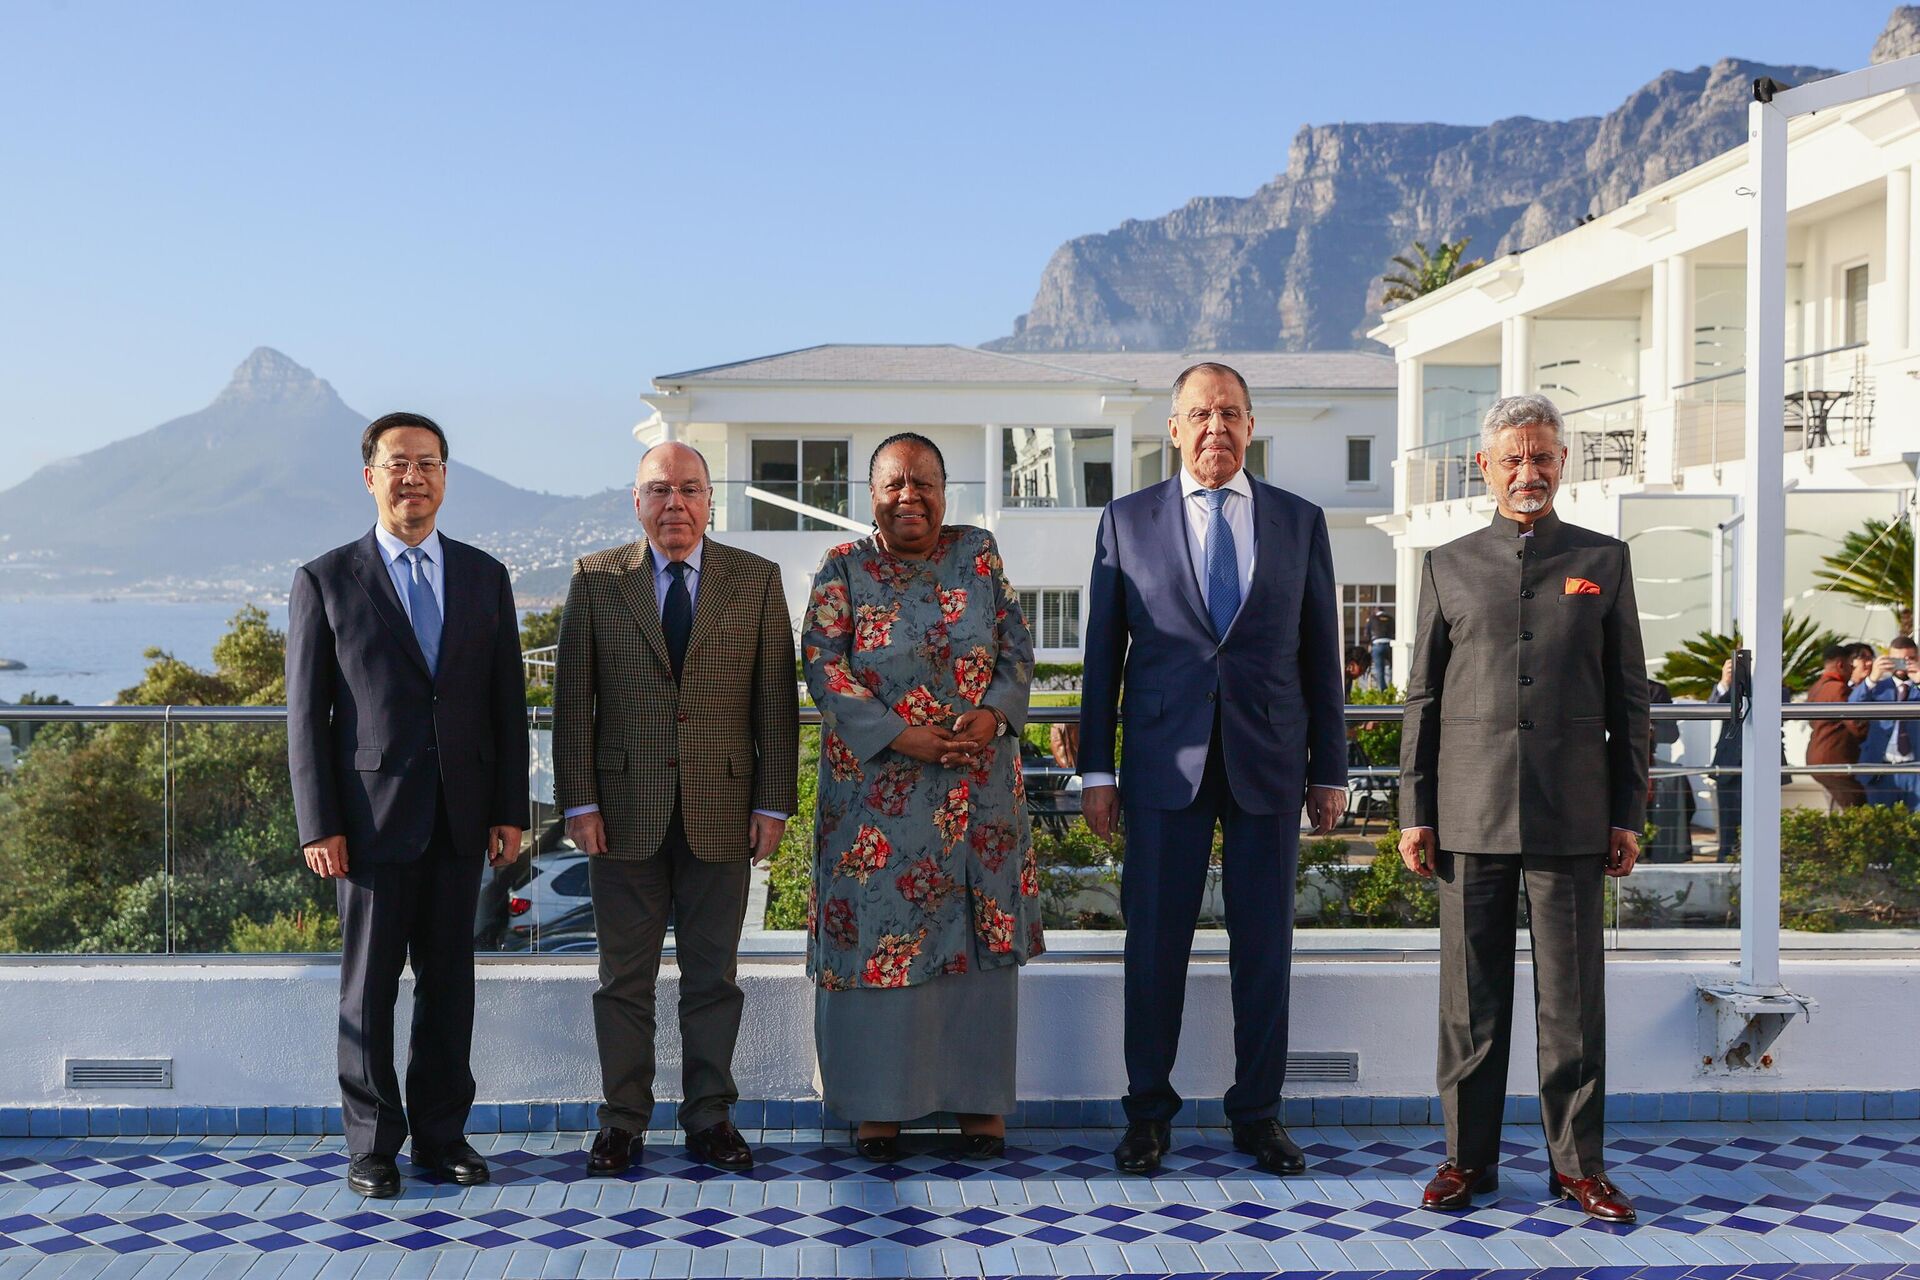 In this handout photo released by the Russian Foreign Ministry, from left, China's Vice Minister of Foreign Affairs Ma Zhaoxu, Brazil's Foreign Minister Mauro Vieira, South Africa's Minister of International Relations and Cooperation Naledi Pandor, Russia's Foreign Minister Sergey Lavrov and India's External Affairs Minister Subrahmanyam Jaishankar pose for a family photo during a BRICS Foreign Ministers meeting, in Cape Town, South Africa.  - Sputnik International, 1920, 03.06.2023